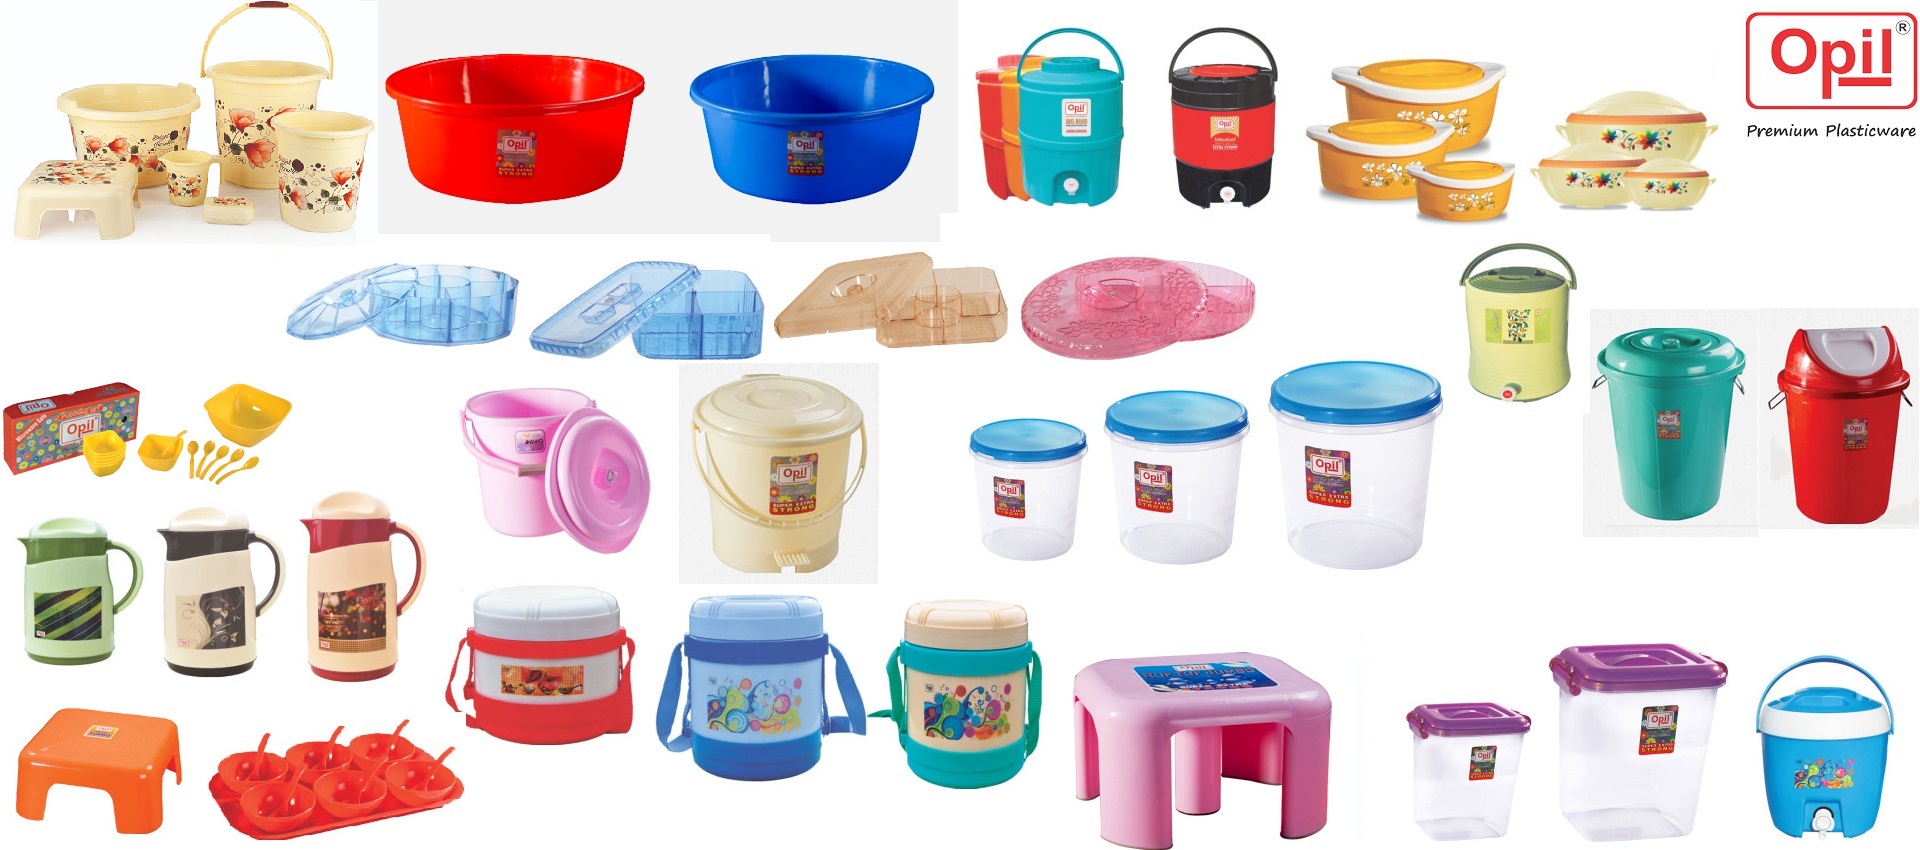 Jayco Plastic - Manufacturer & Supplier of Insulated Plastic Houseware,  Steel Casseroles & Back-To-School Lunch Boxes & Water Bottles